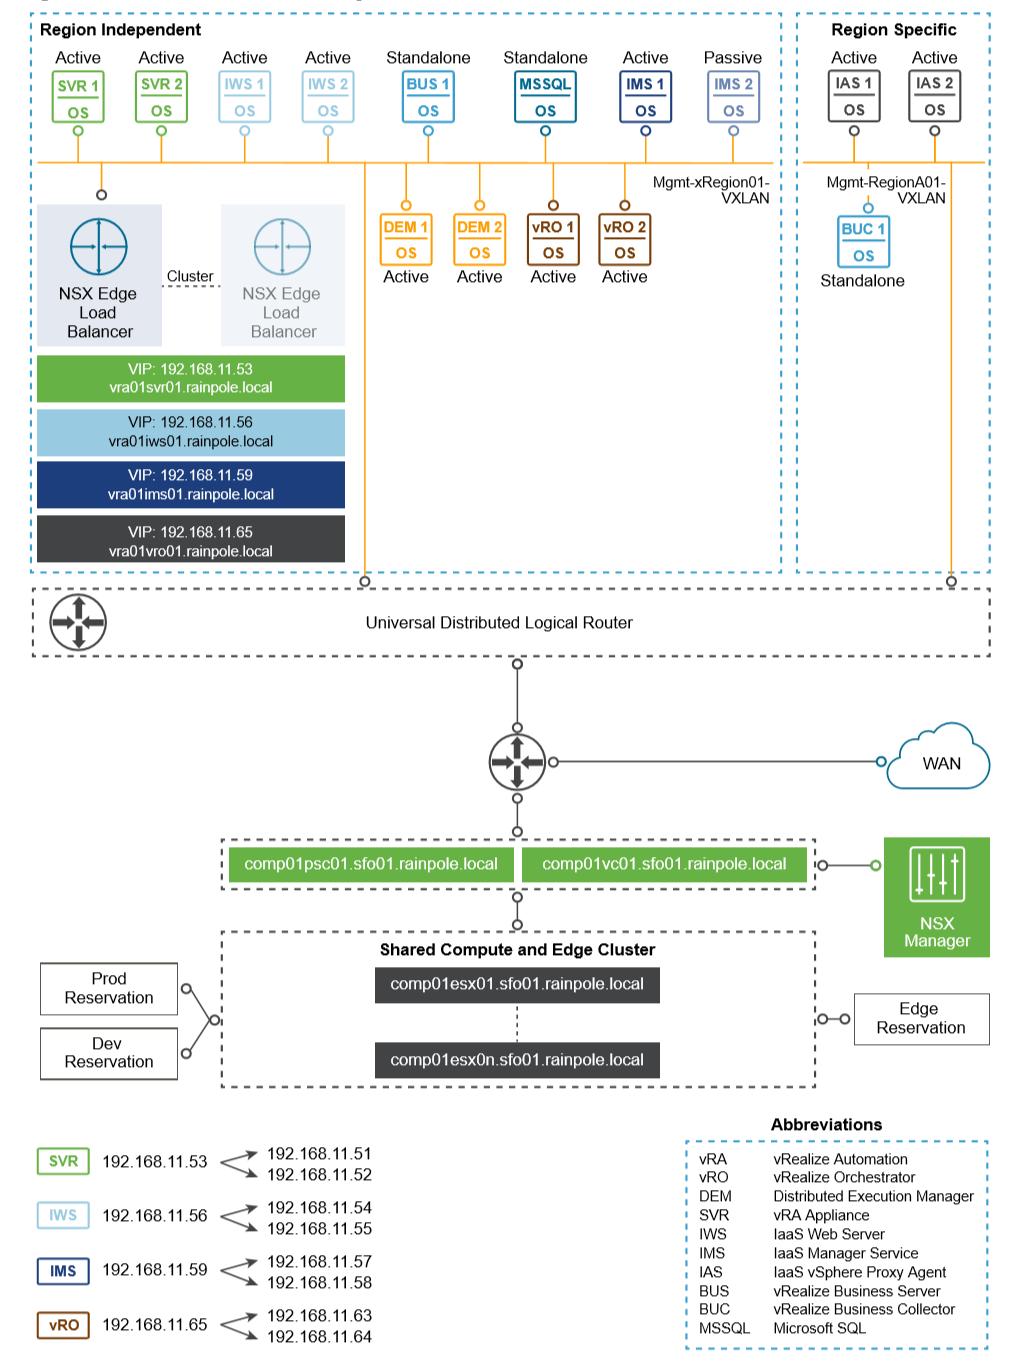 vrealize Automation Region A ROBO(s) managed by Regional vra Deployed with VVD for SDDC